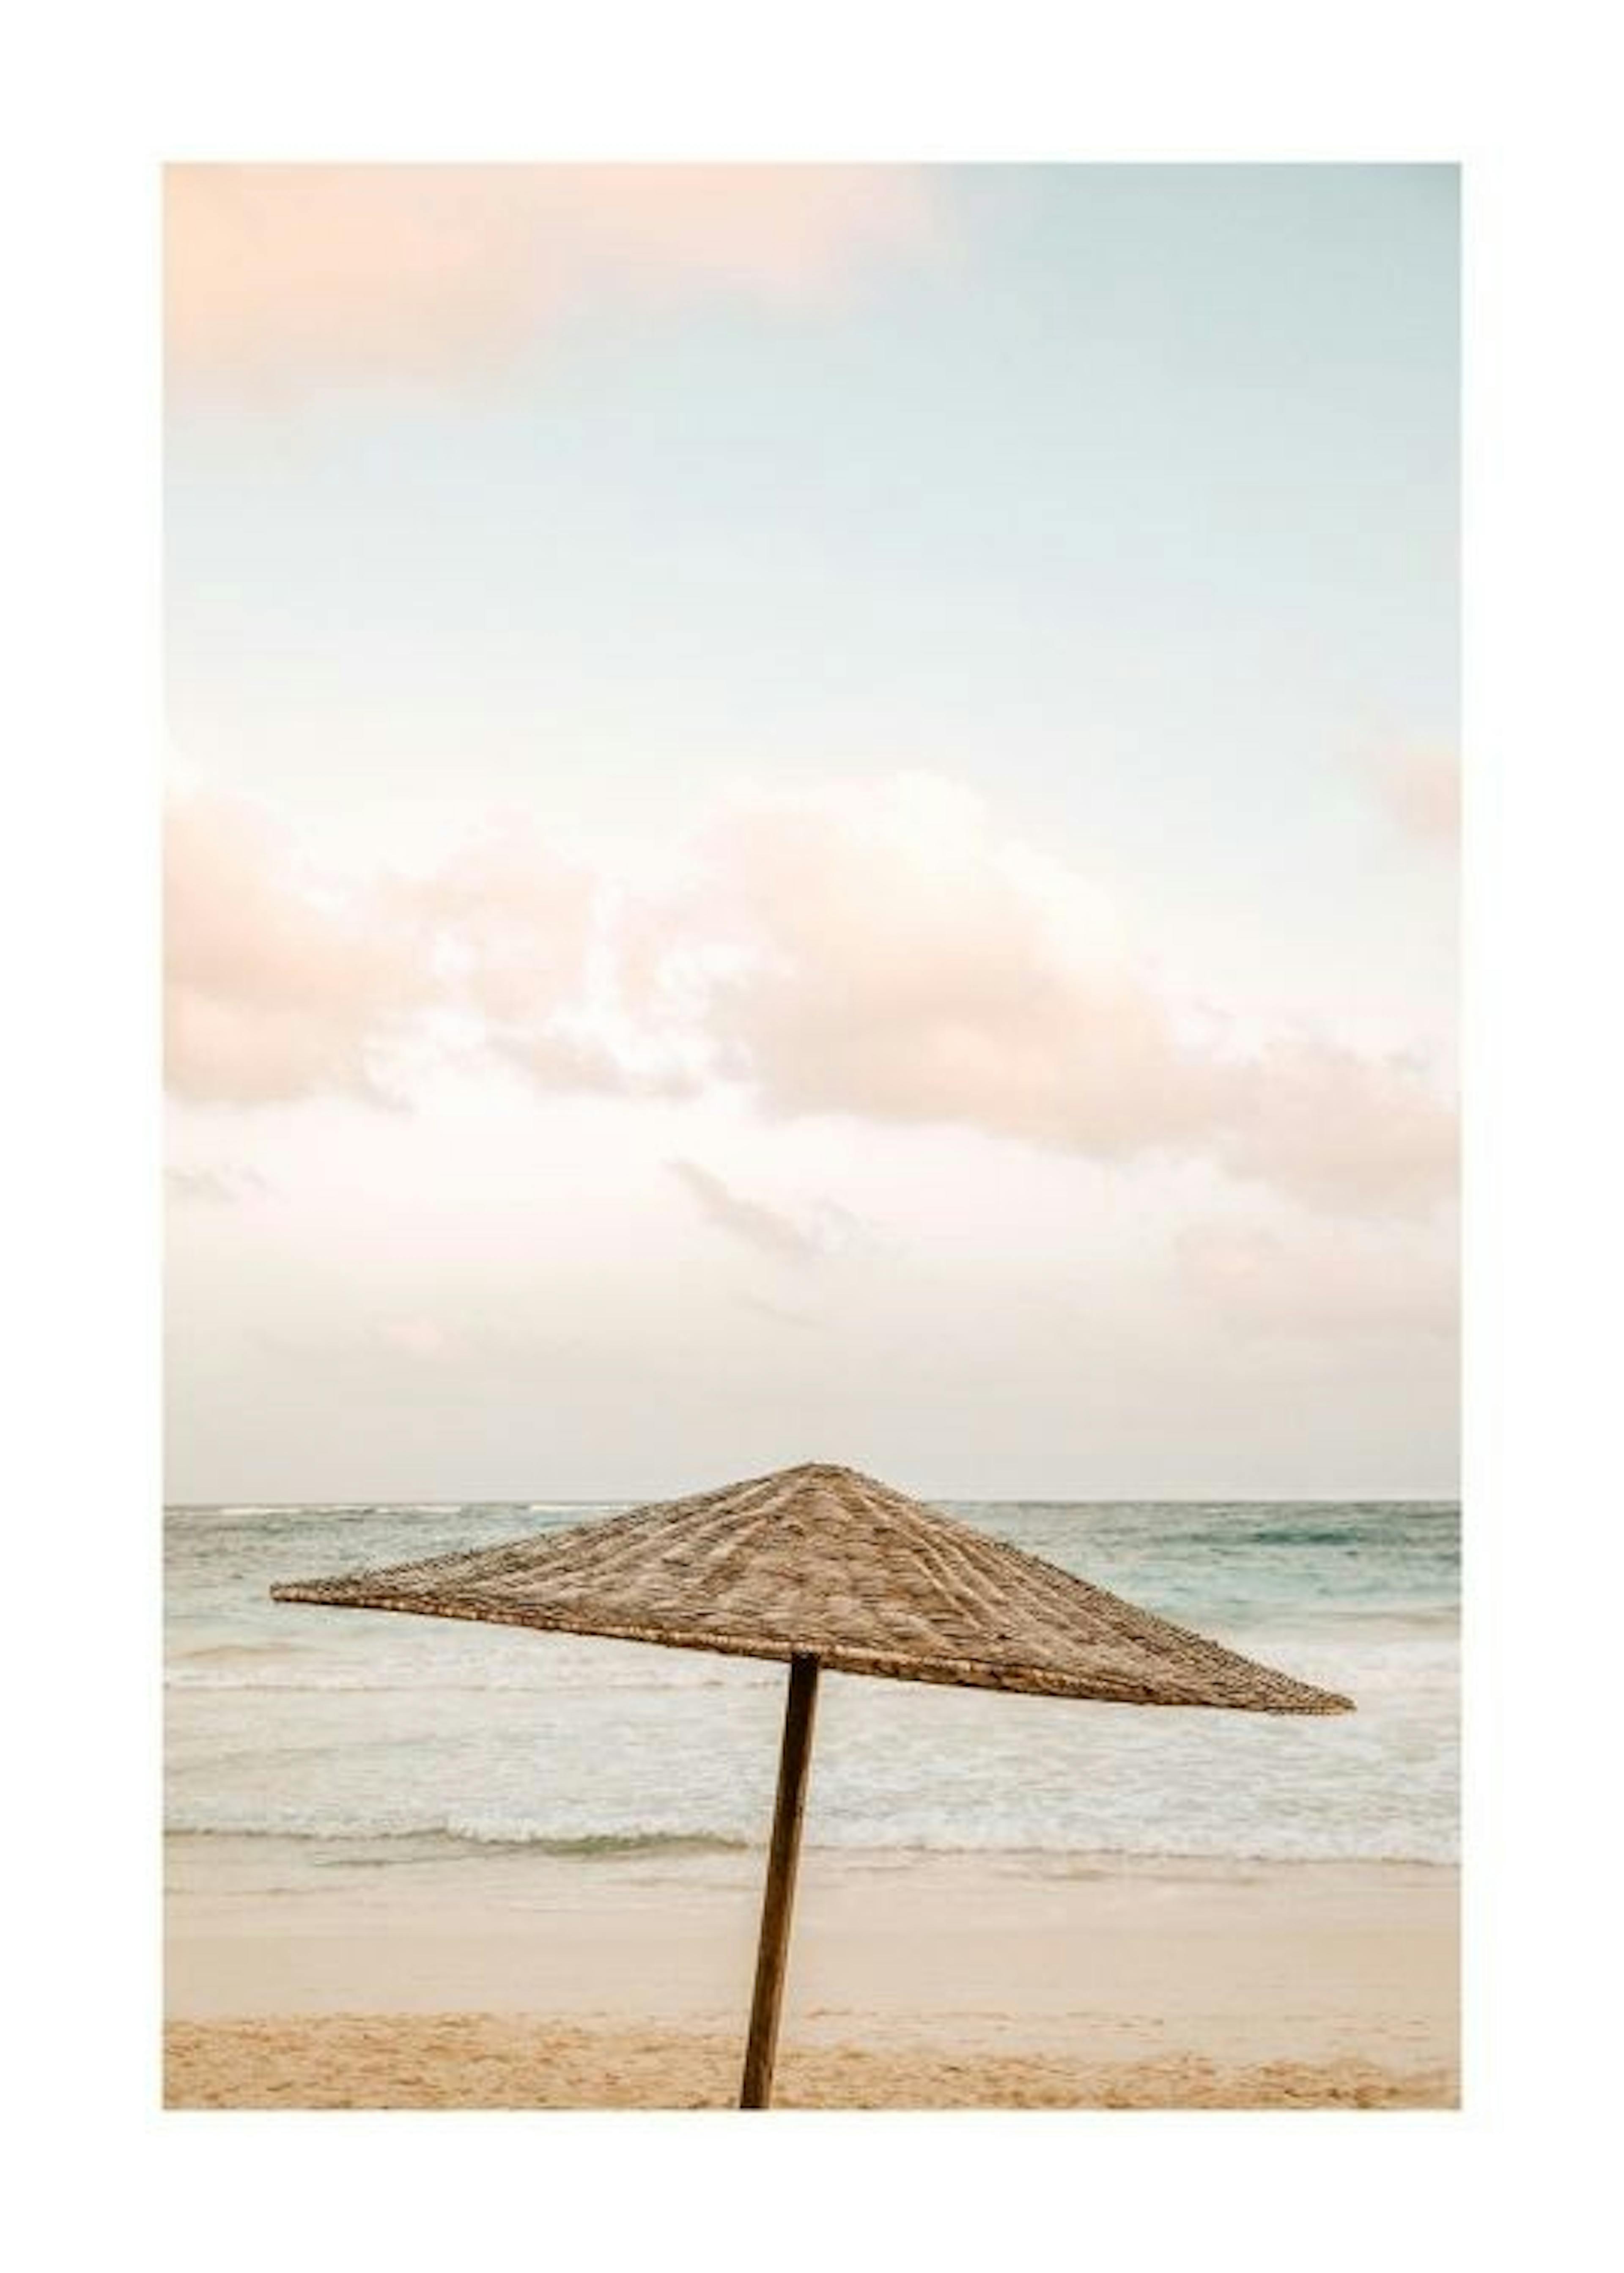 Parasol by the Ocean Poster 0